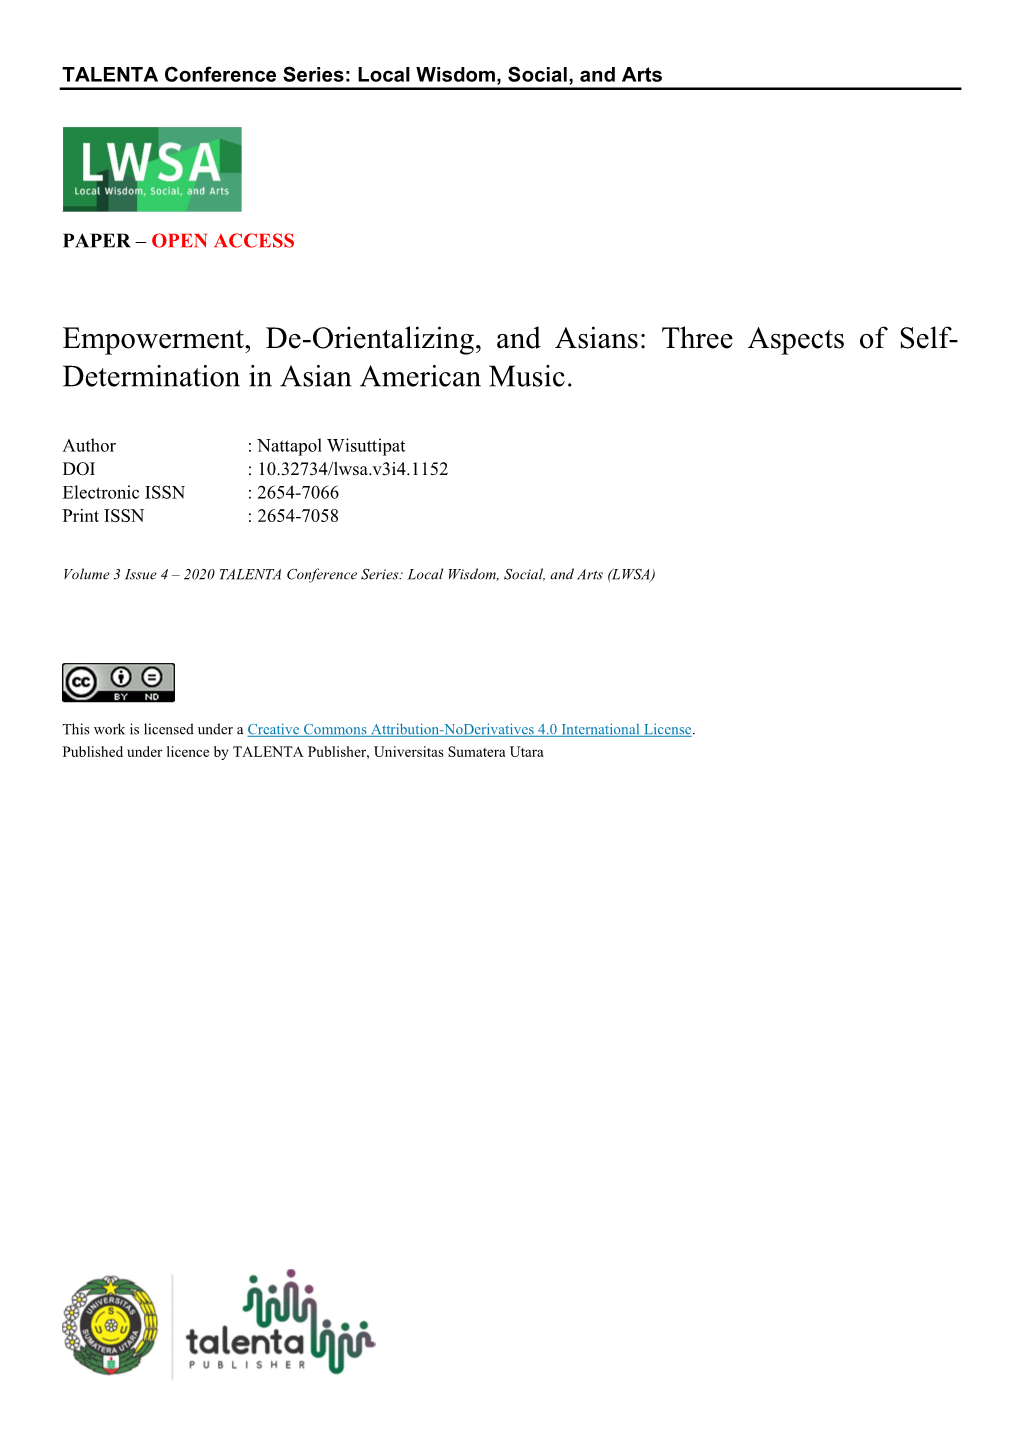 Determination in Asian American Music